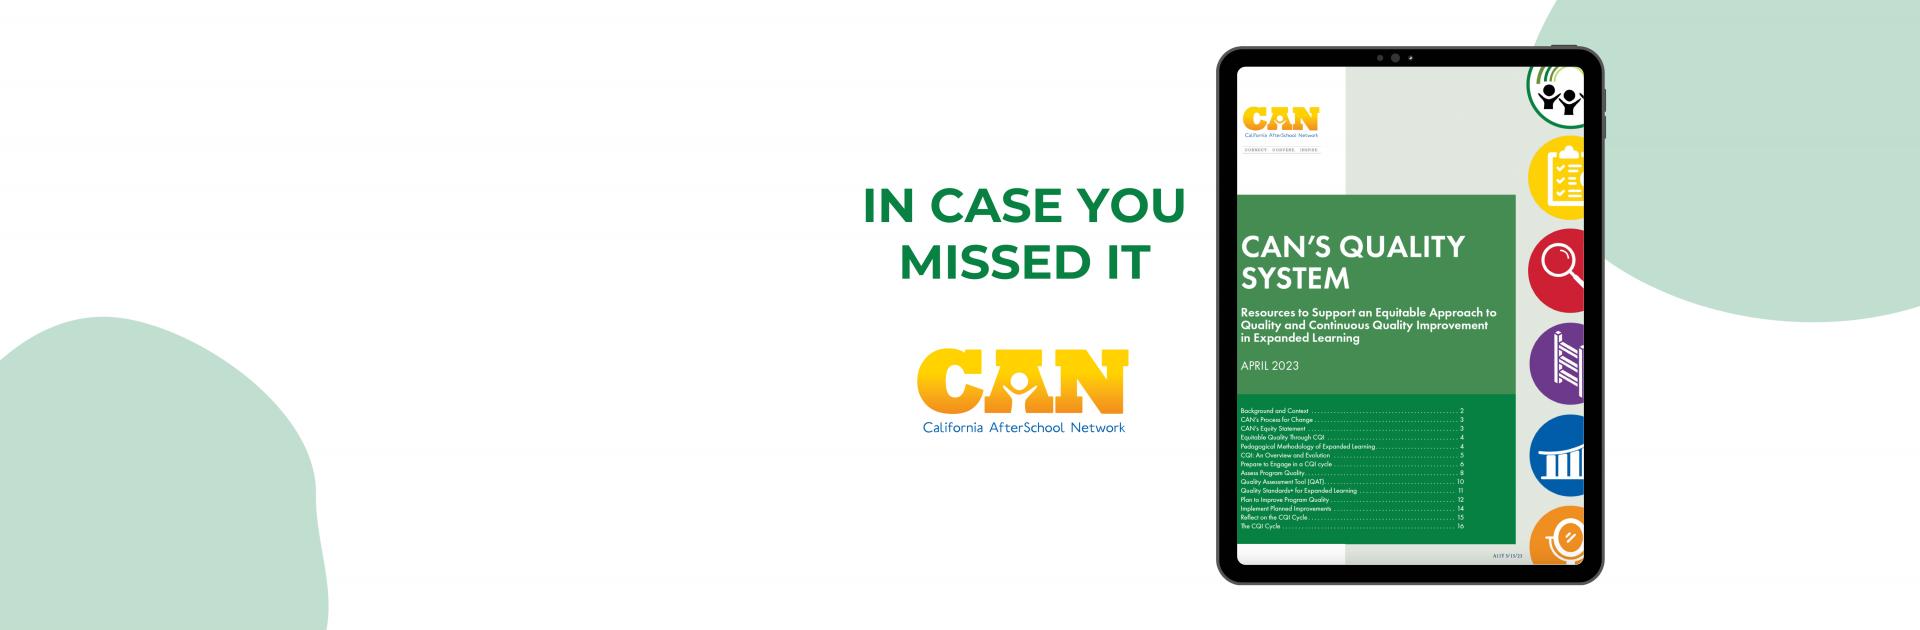 CAN's Quality System cover in tablet with words saying in case you missed it, CAN's Quality System with CAN logo